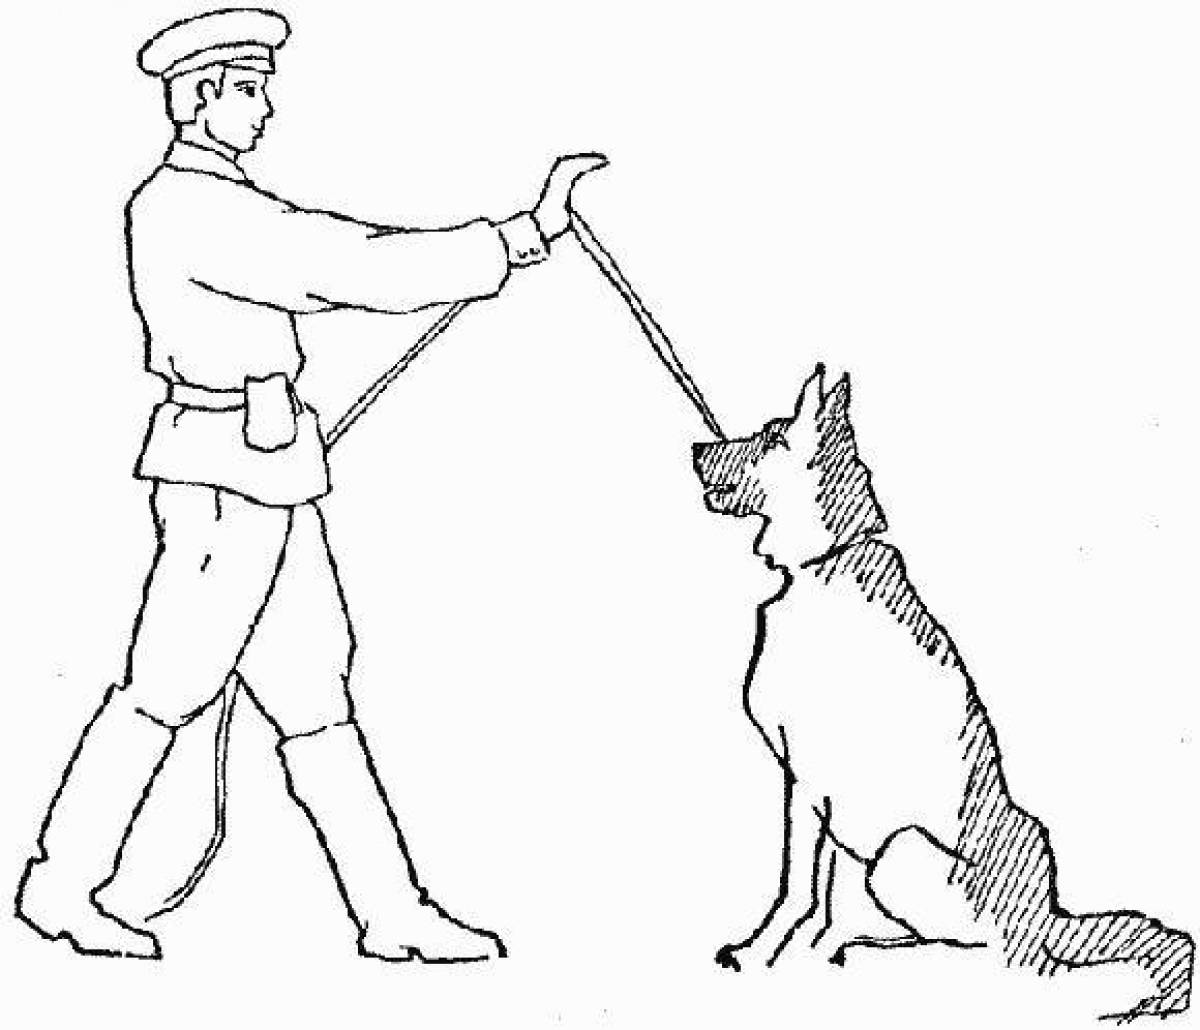 Glorious border guard with a dog